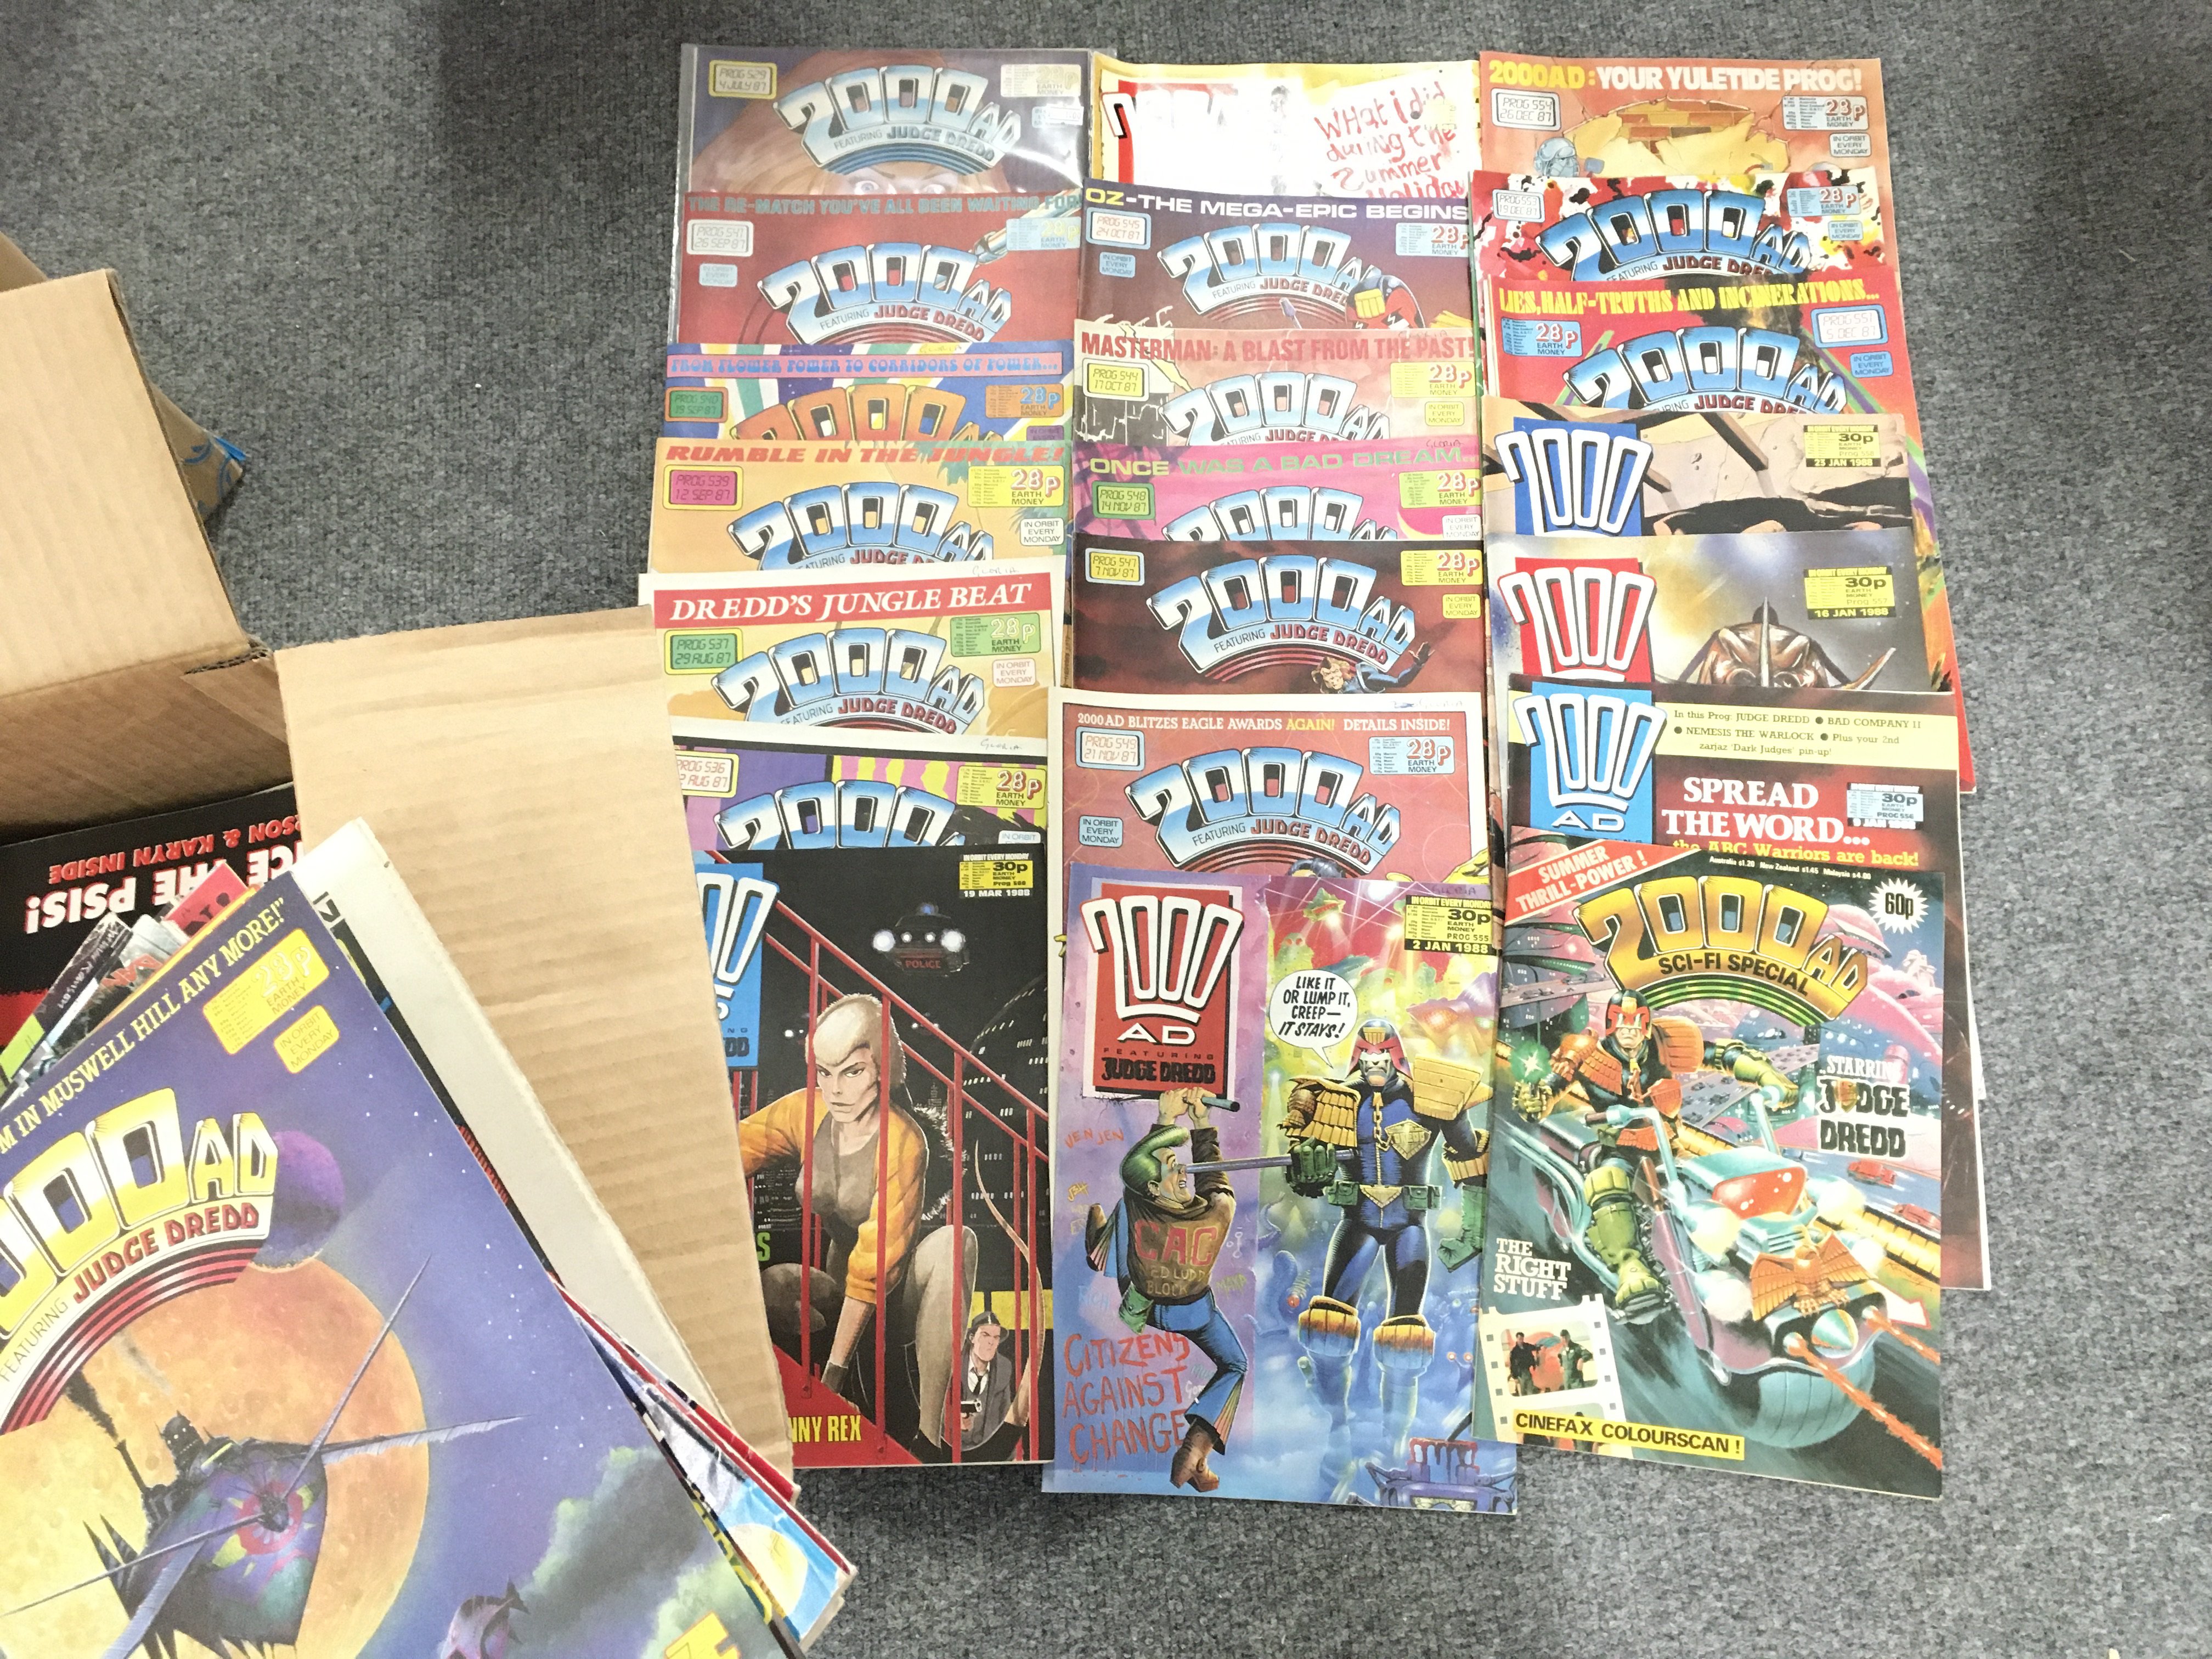 2 Boxes Containing A Collection of 2000 A.D Comics - Image 2 of 3